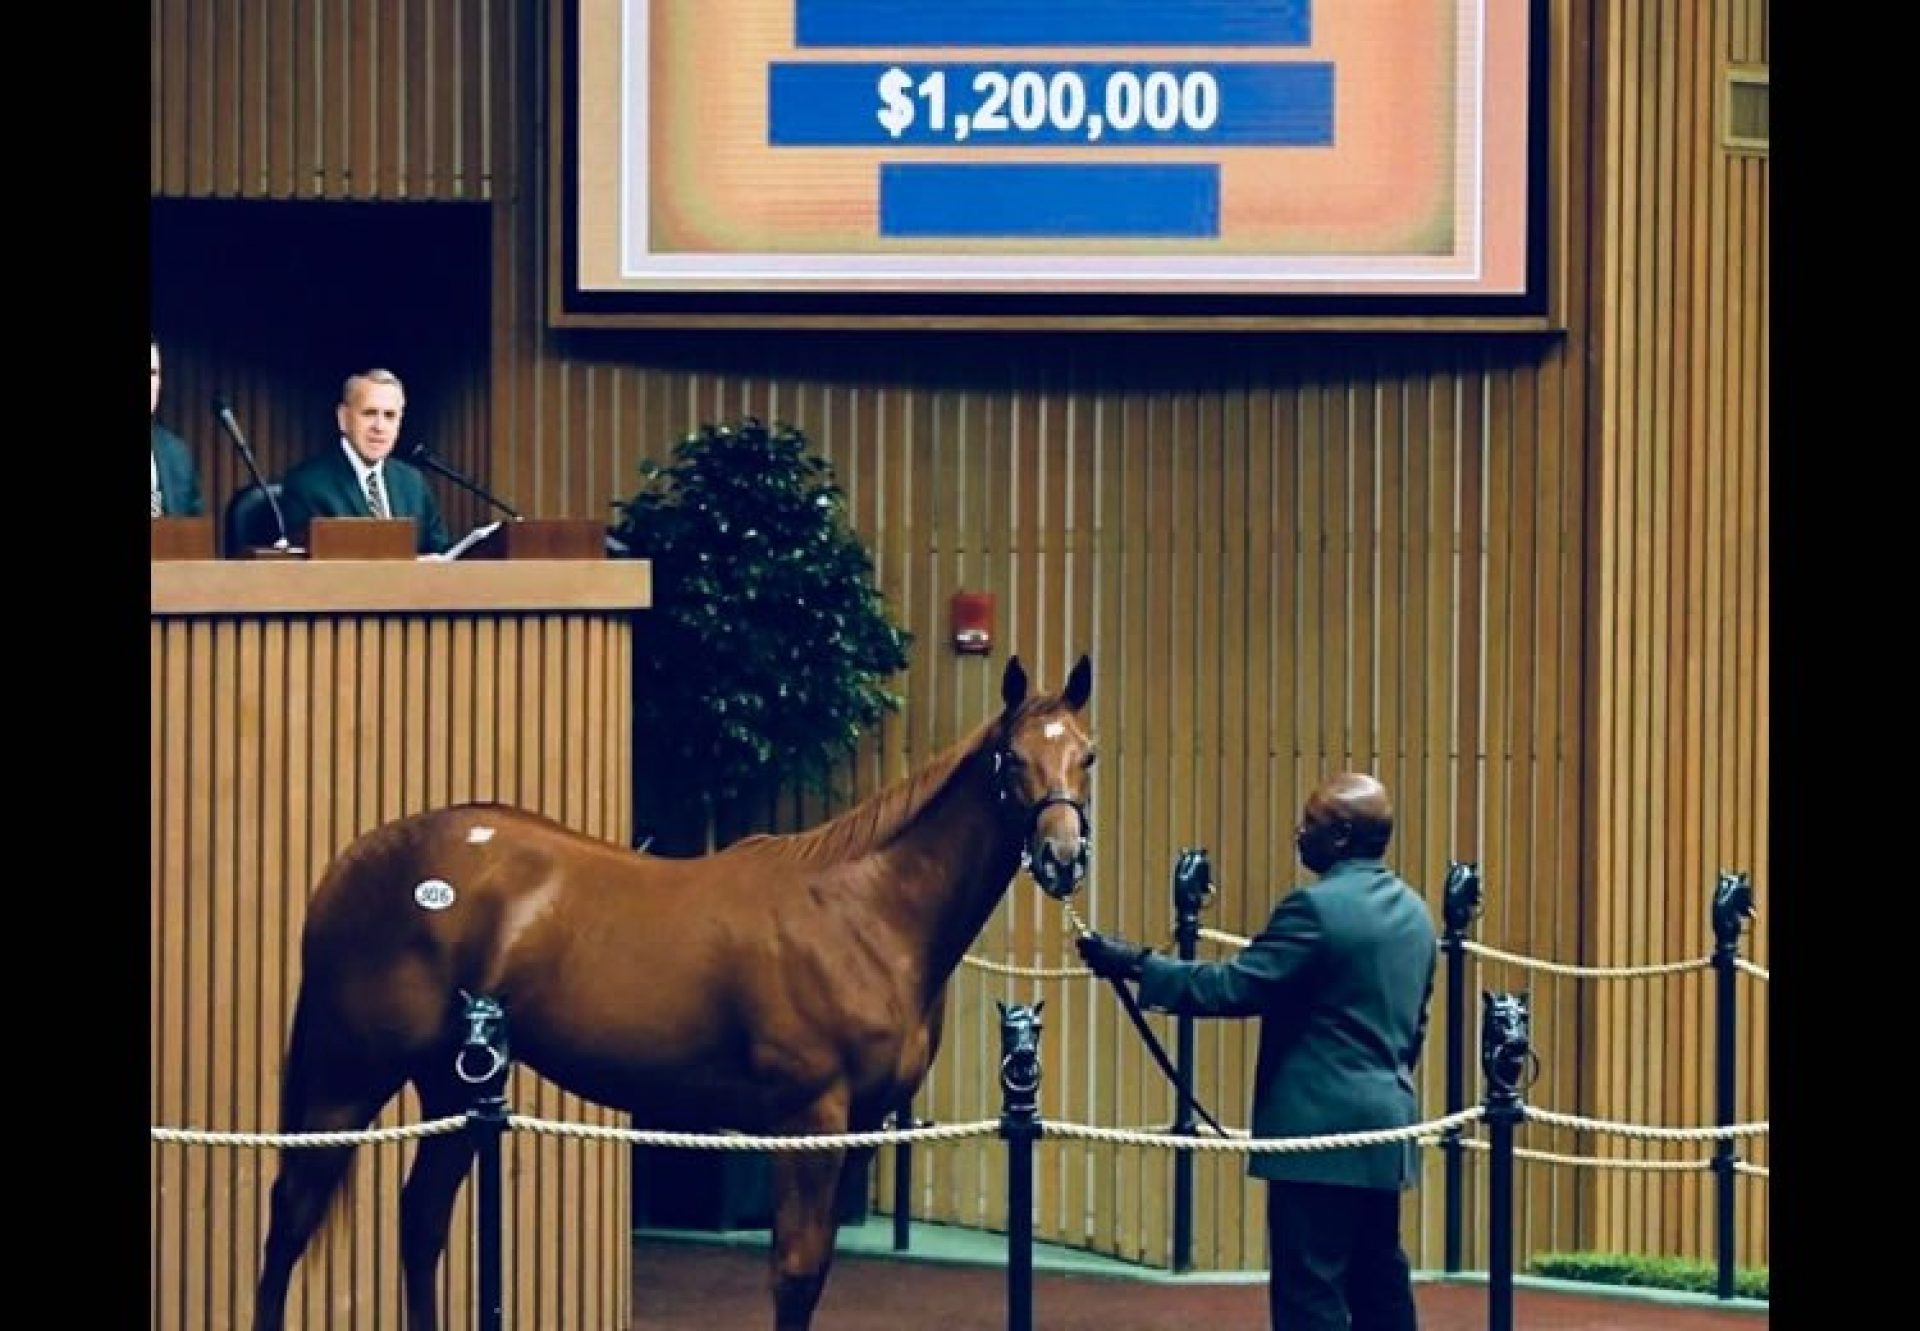 American Pharoah ex Pretty N Smart yearling filly selling for $1.2 million at Keeneland